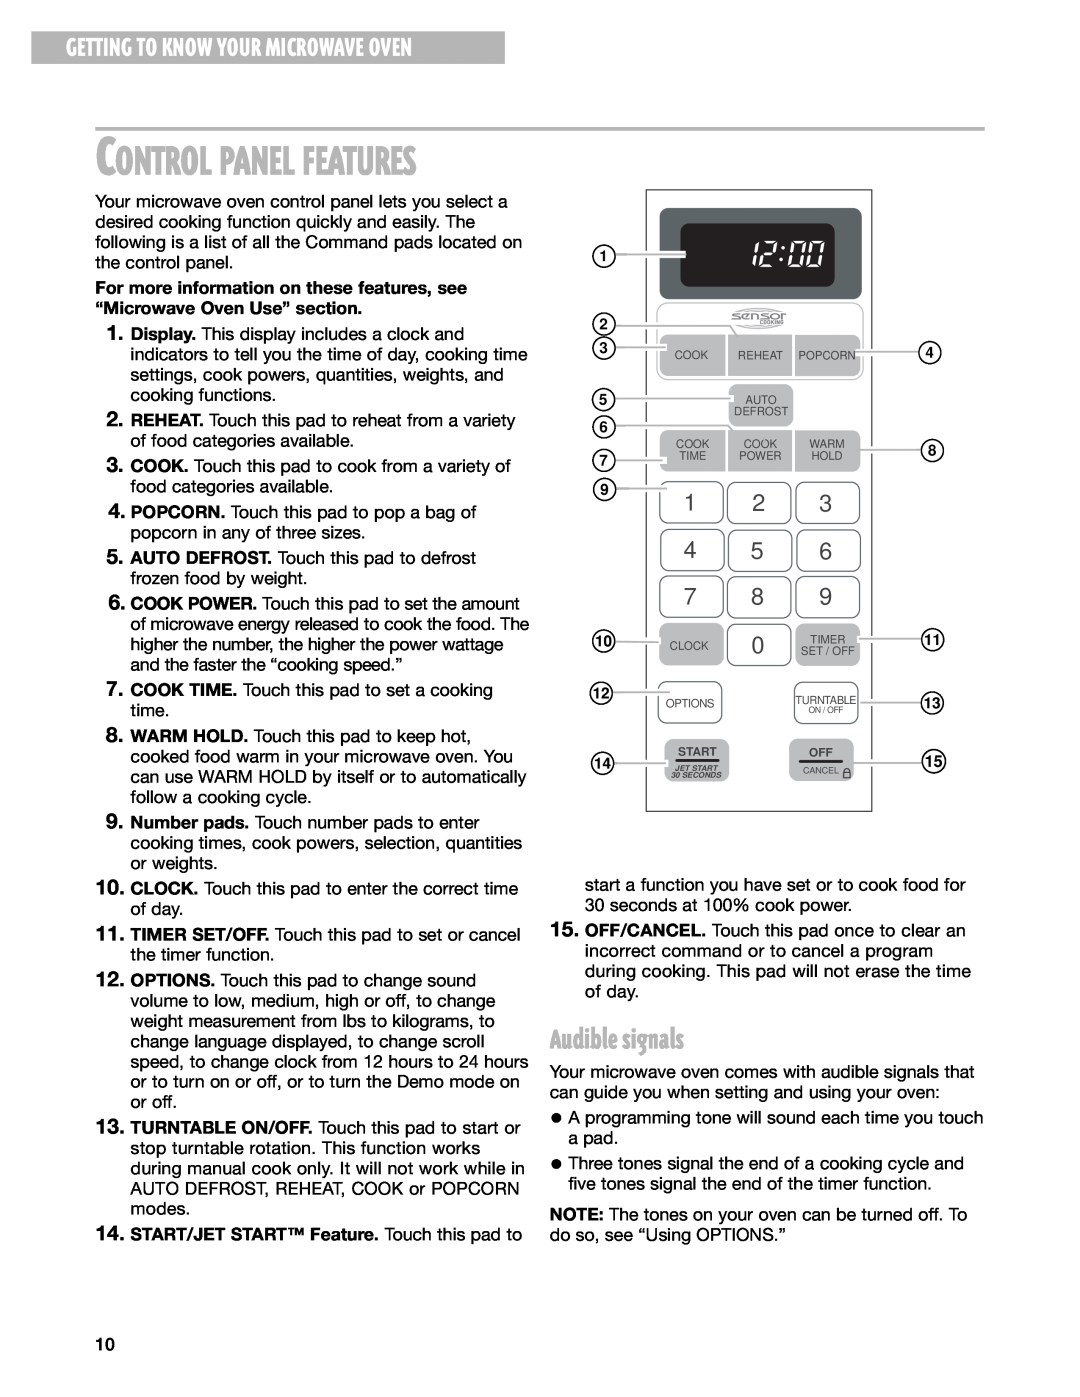 Whirlpool GT4185SK installation instructions Control Panel Features, Audible signals, Getting To Know Your Microwave Oven 